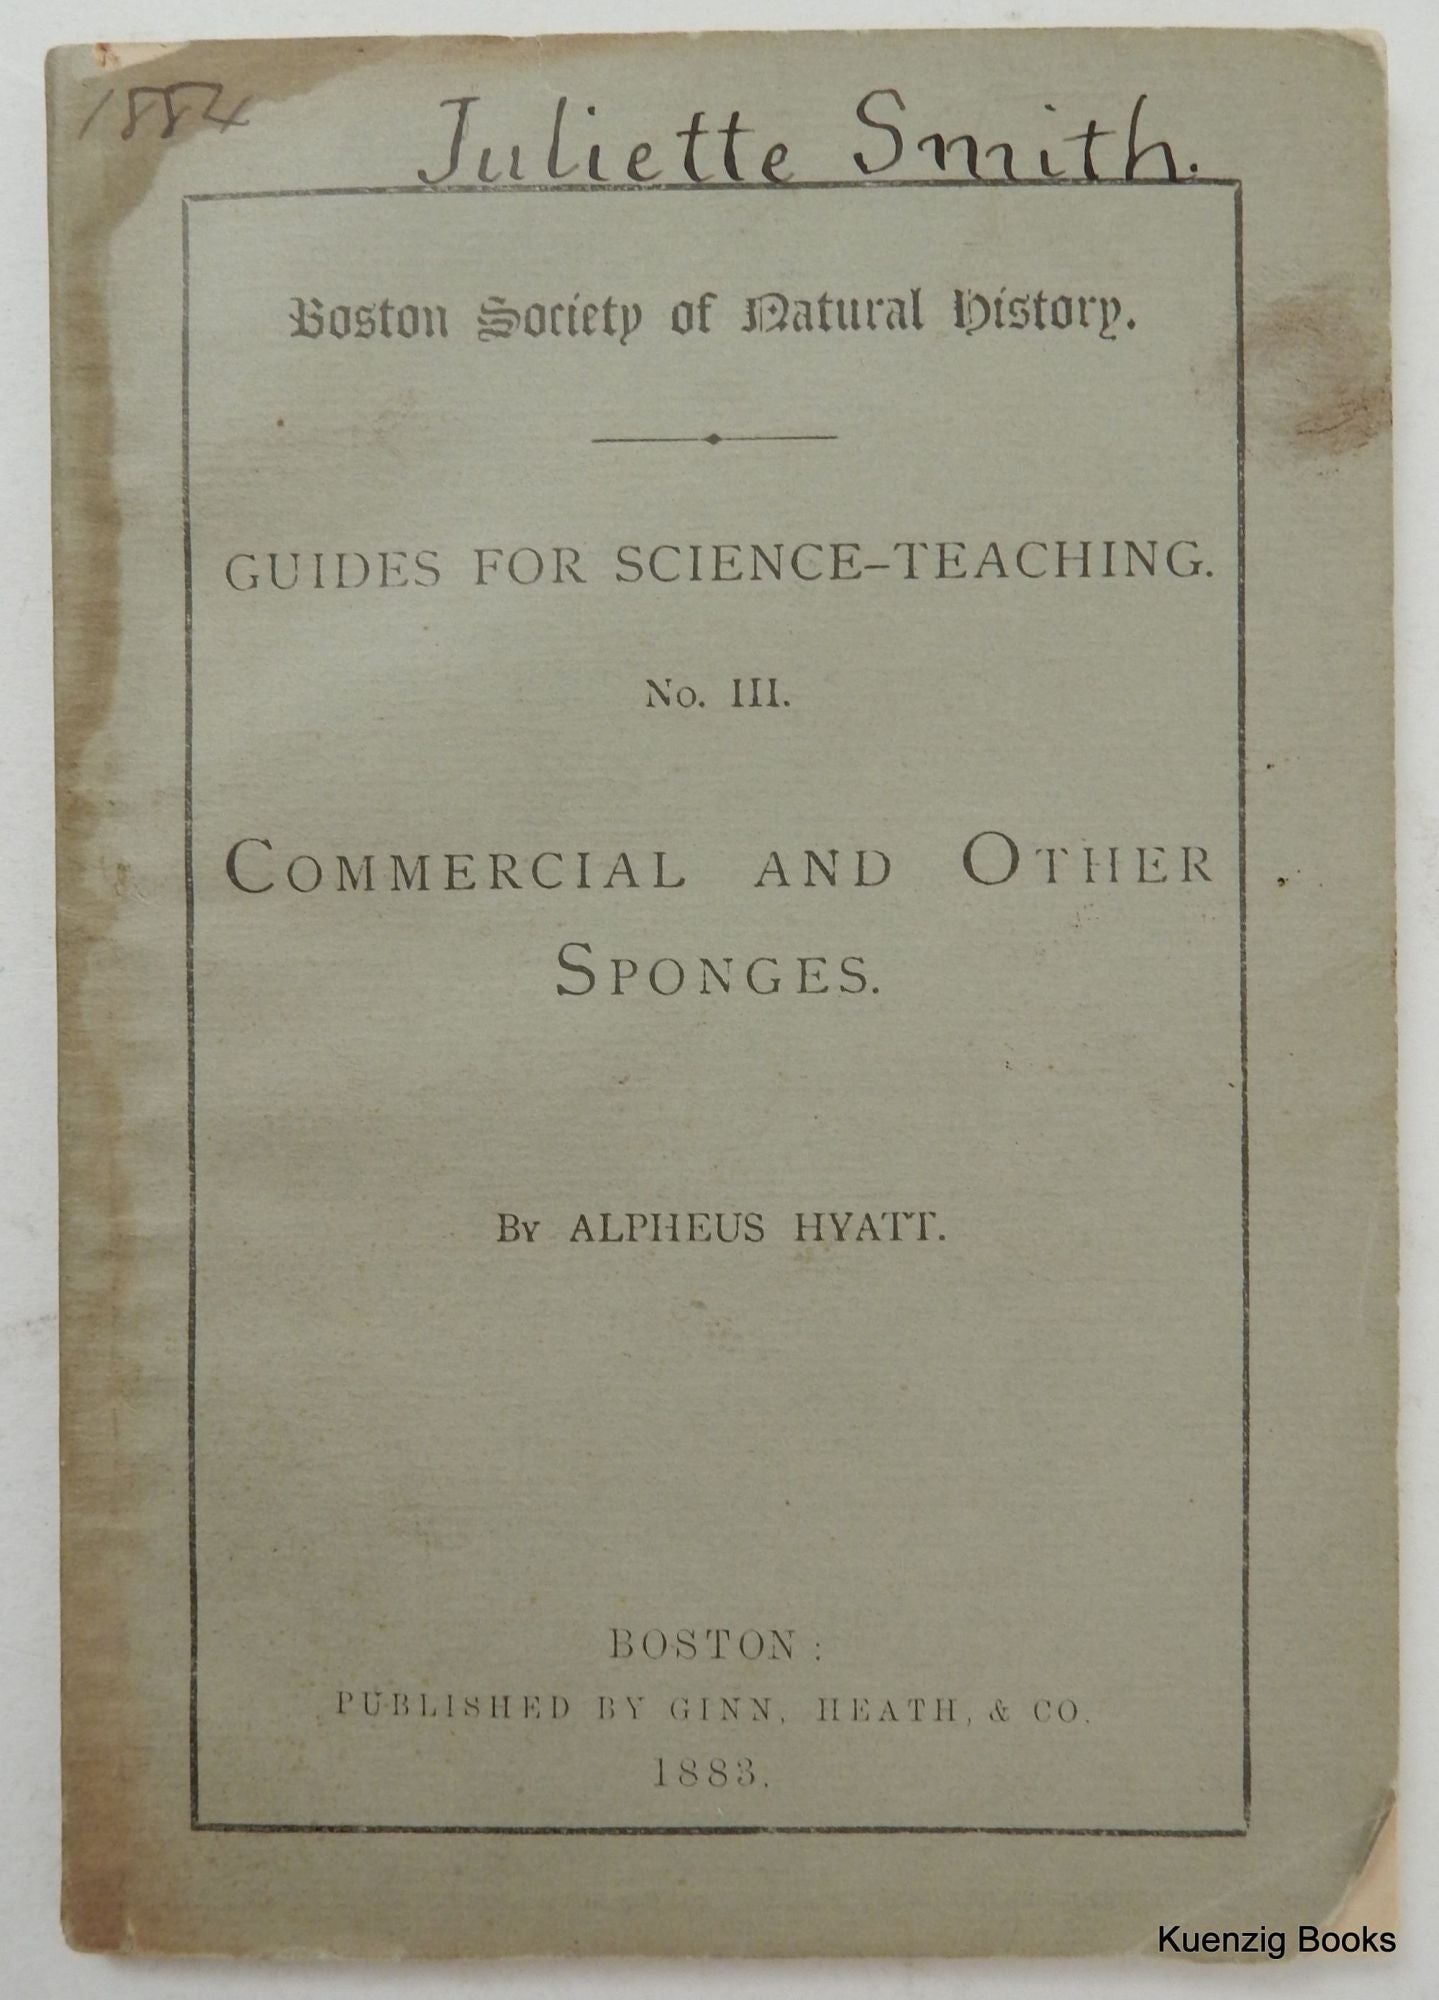 Item #23789 Guides for Science - Teaching No III ... Commercial and Other Sponges. Alpheus Hyatt.